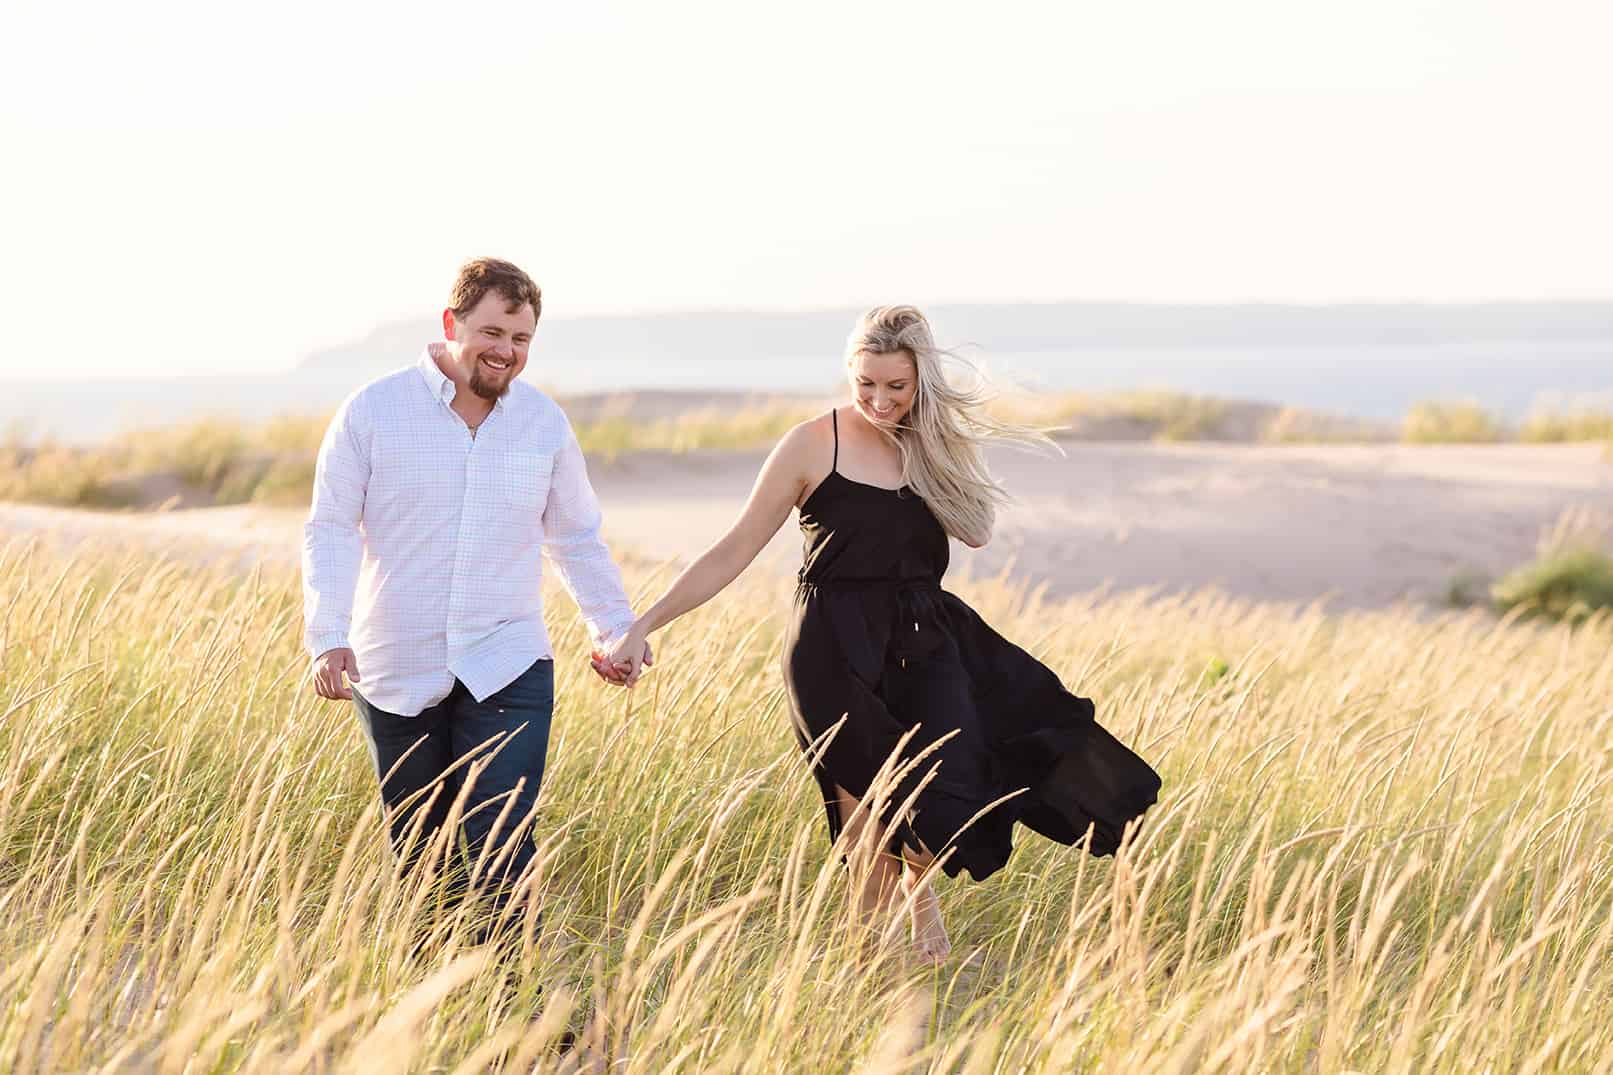 engagement session in dune grass and sand dunes